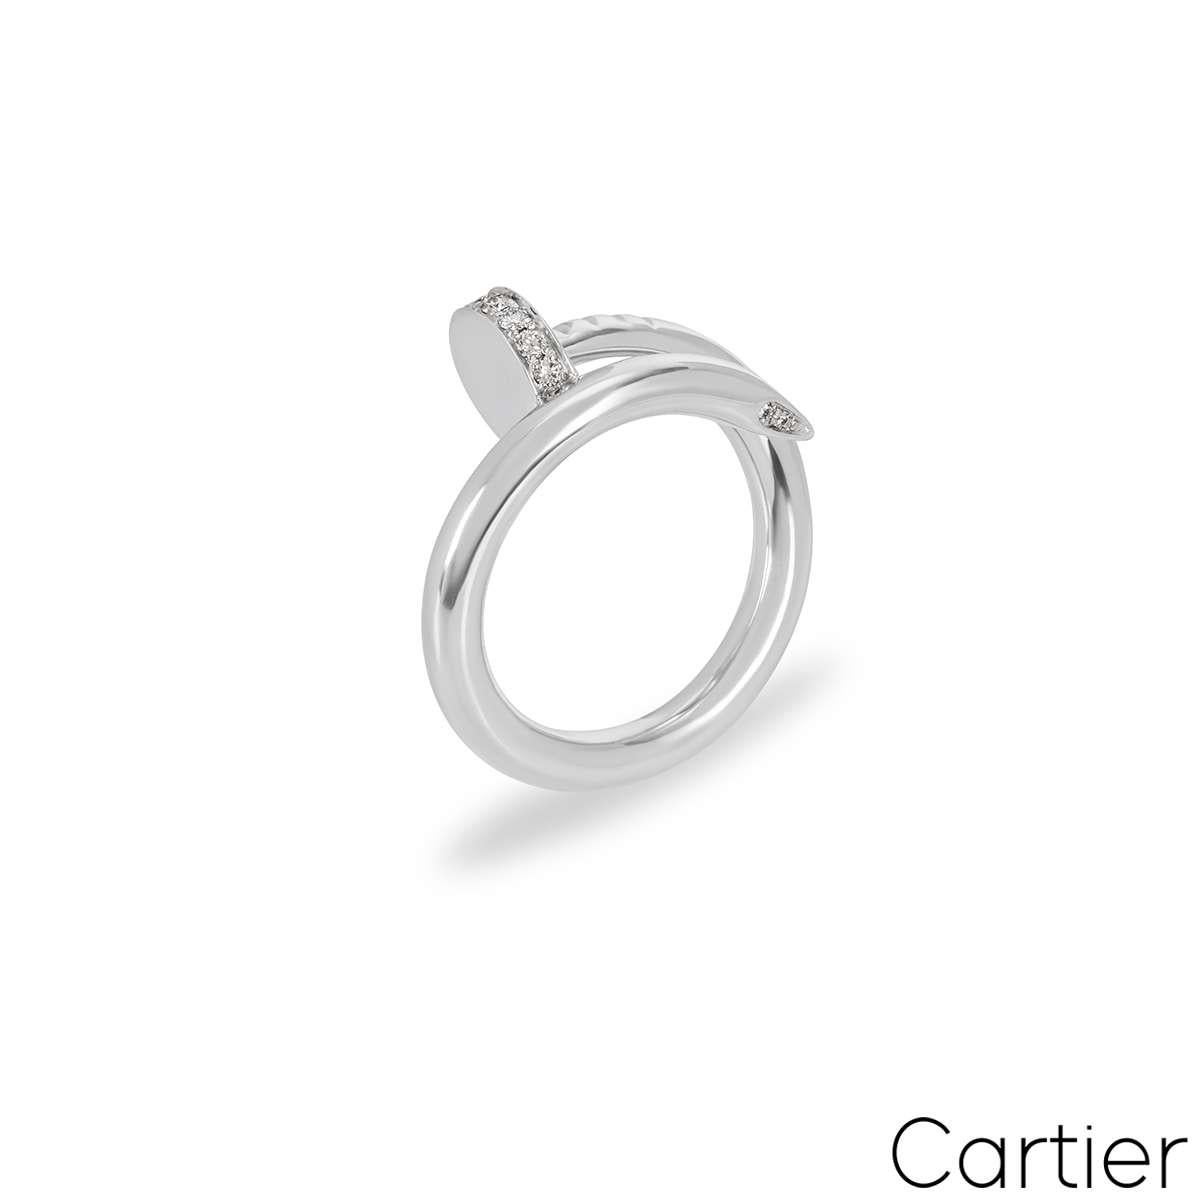 An 18k white gold diamond ring by Cartier from the Juste un Clou collection. The ring is in the style of a nail and has 22 round brilliant cut diamonds set in the head and tip with a total weight of 0.13ct. A size UK M - EU 52 and this ring has a